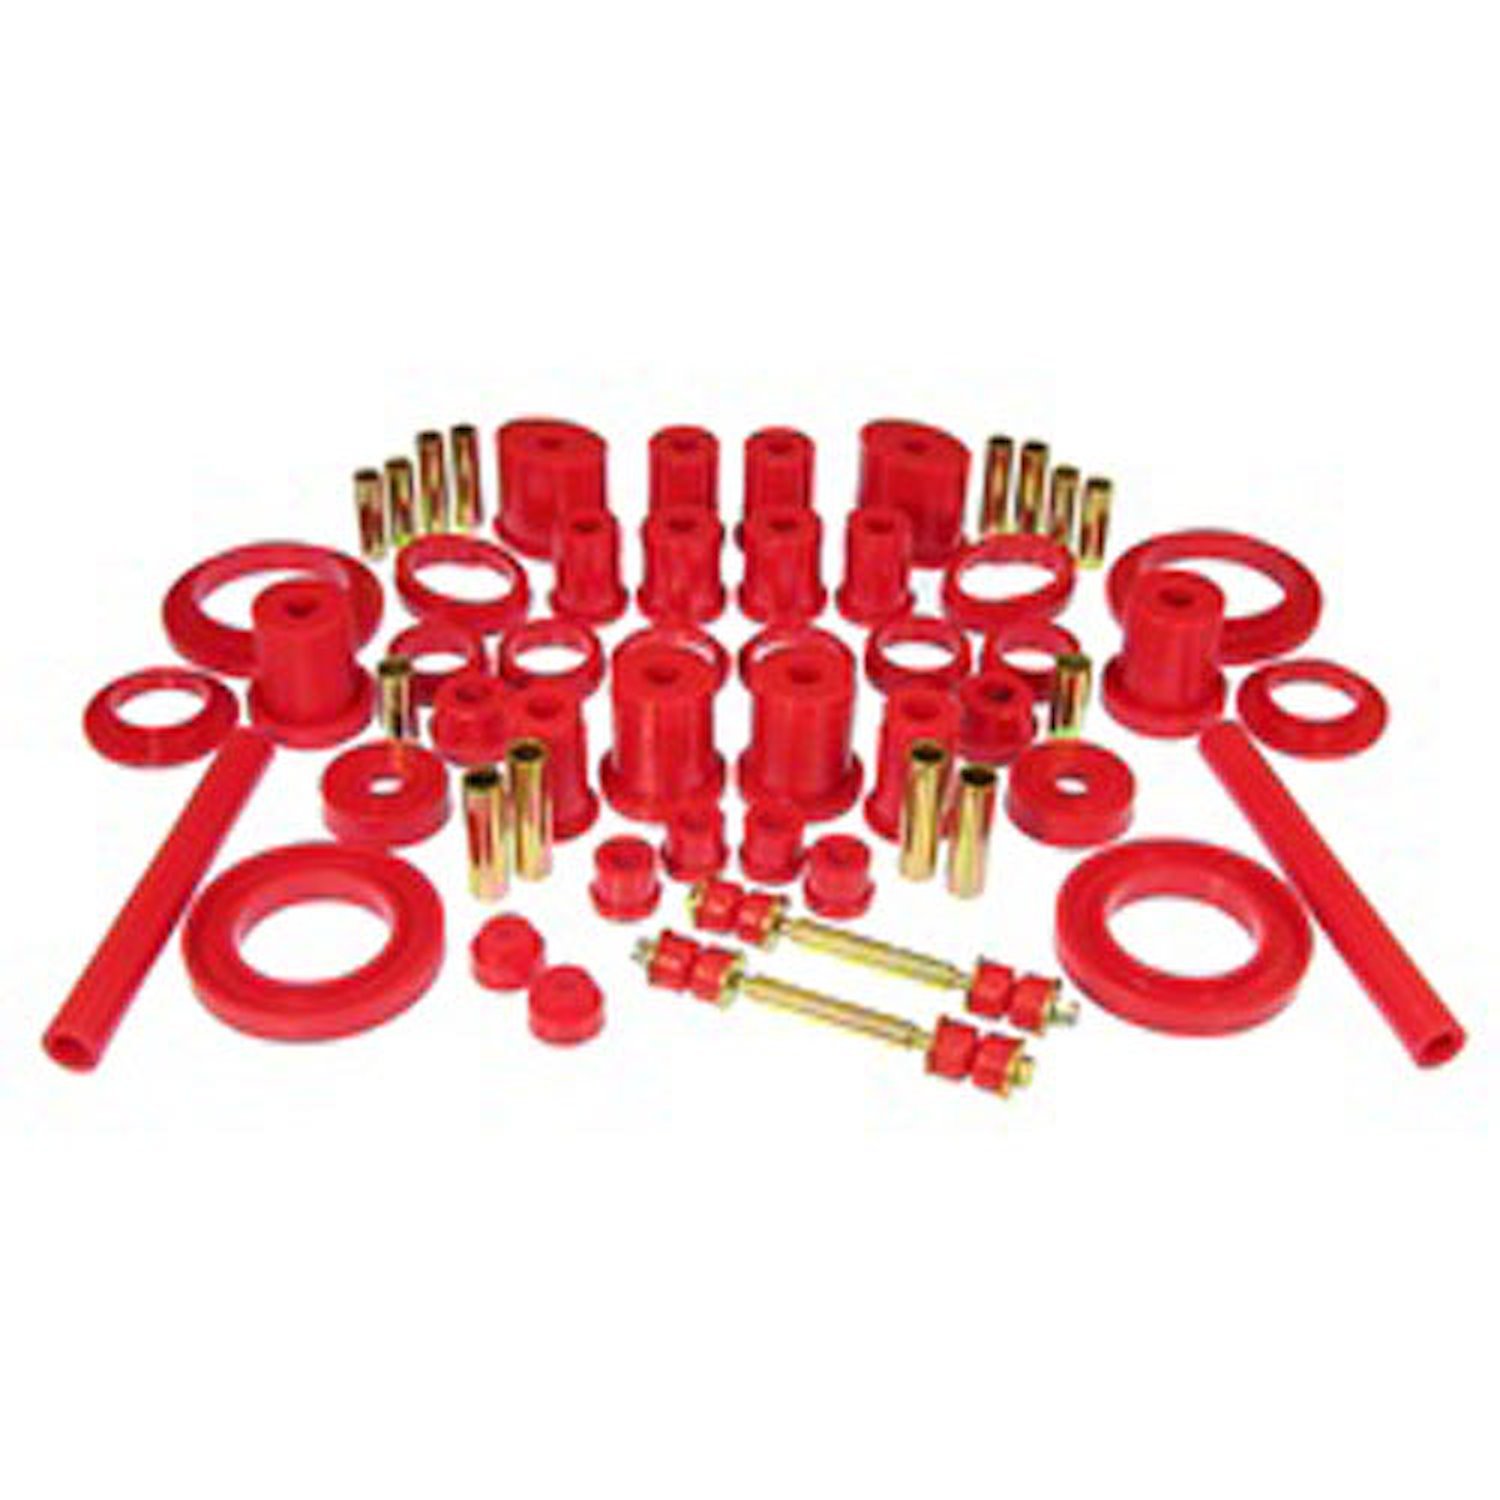 Total Kit Red Incl. C-Arm Front And Rear/Drive Train/Spring Pads/Steering Bushings/Strut Tower/Sway Bar End Links/Tie Rod Boots